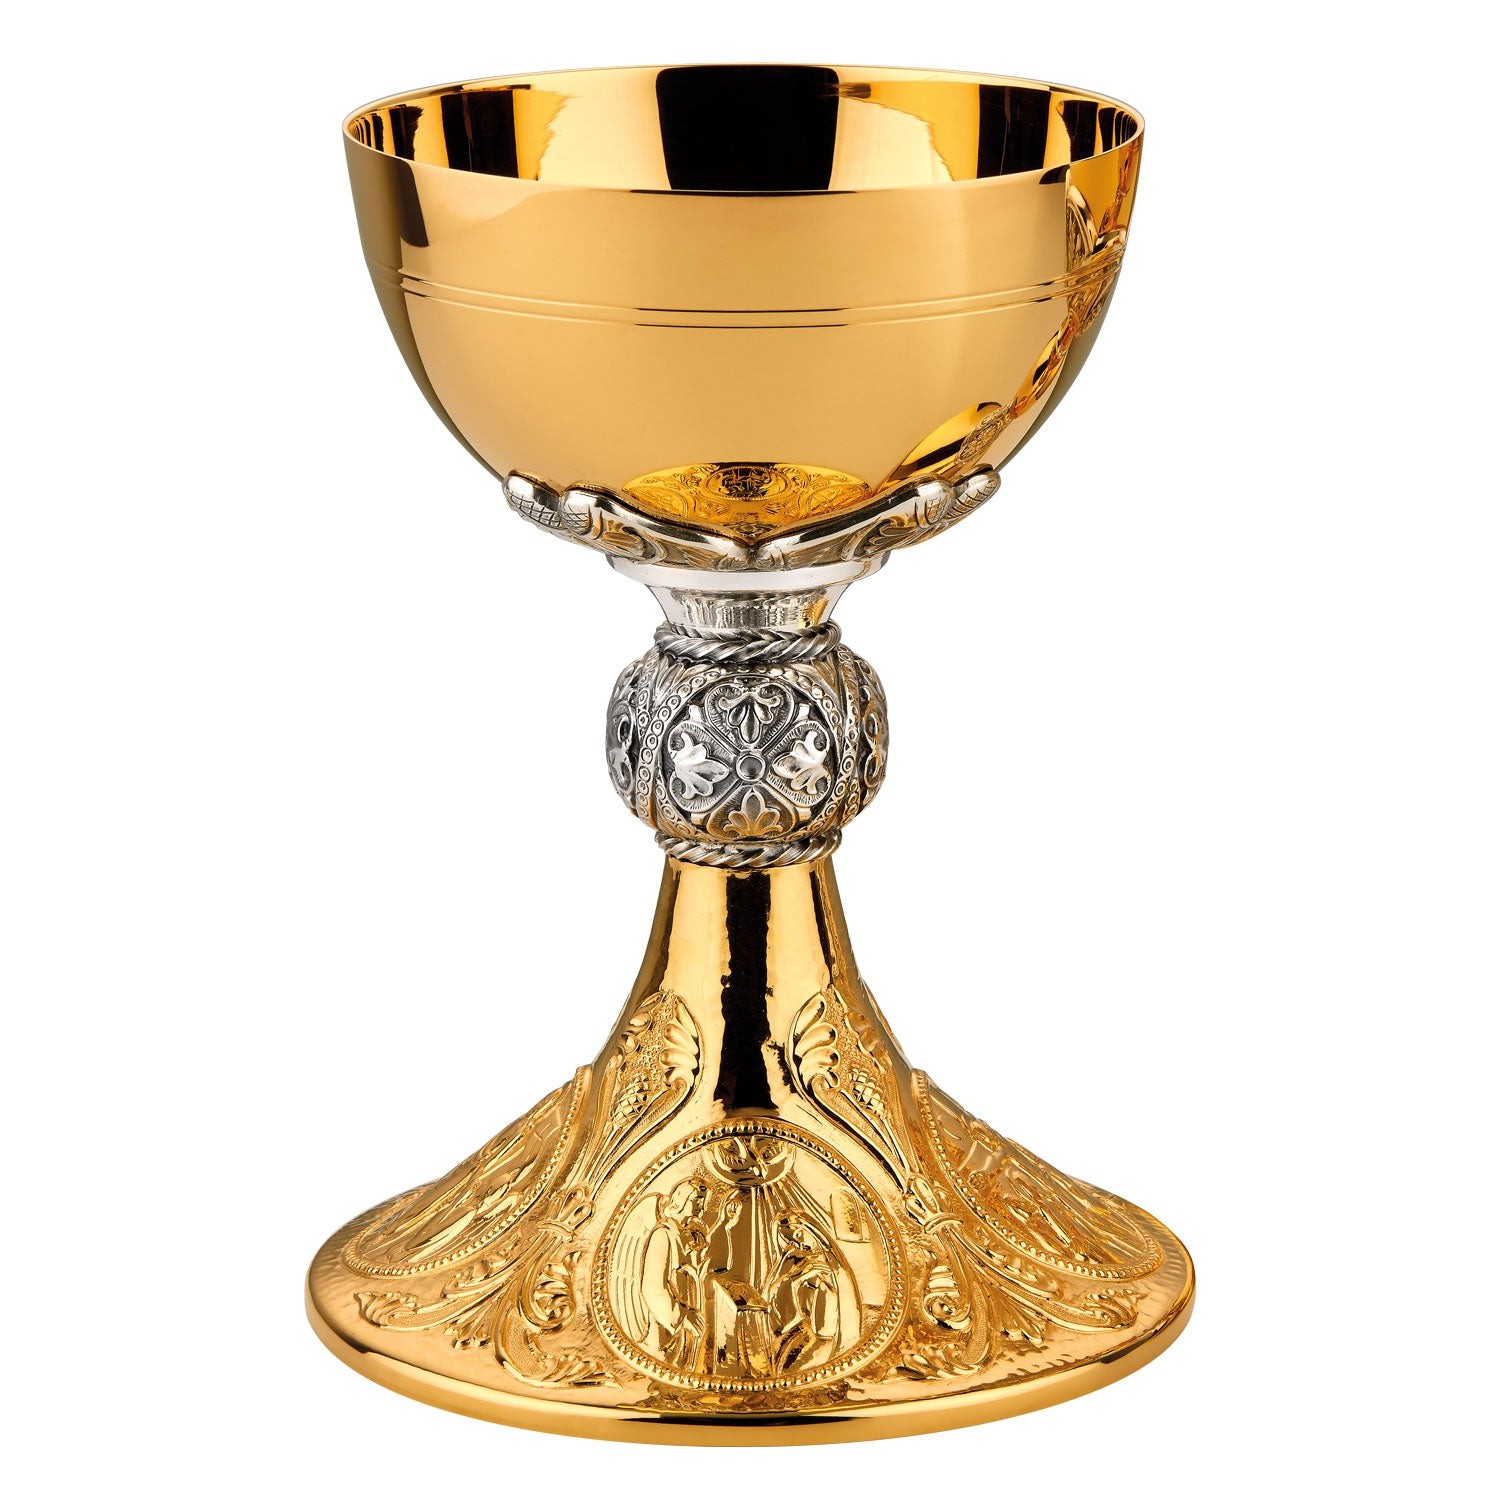 Gold Chalice with floral motifs and medallions depicting the Annunciation, Last Supper, Crucifixion and Resurrection